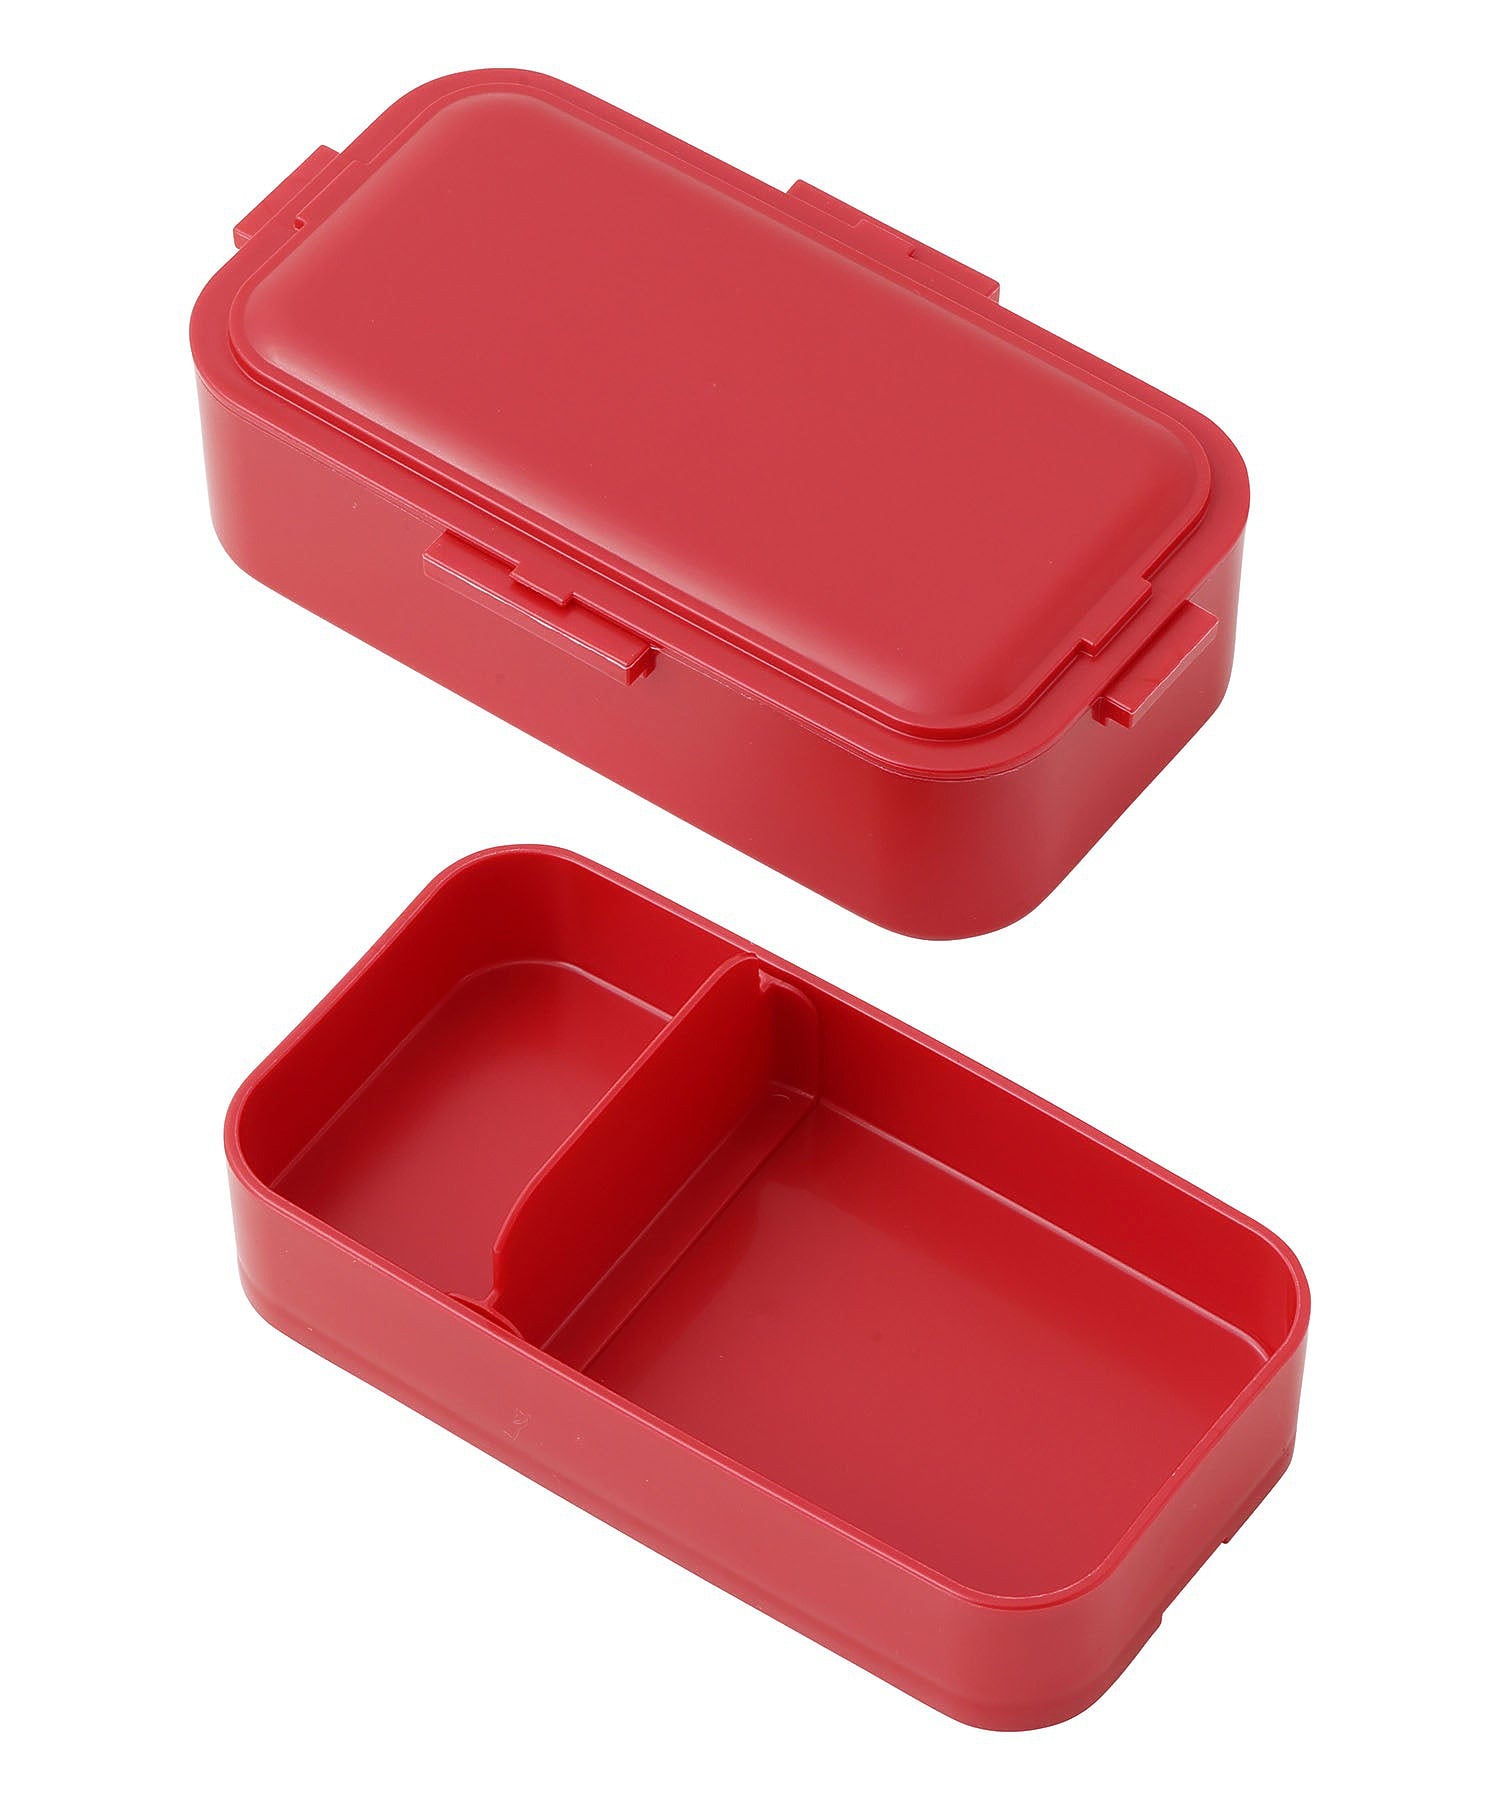 LIFE STYLE｜LOGO TOW TIERED LUNCH BOX RED MILKFED.